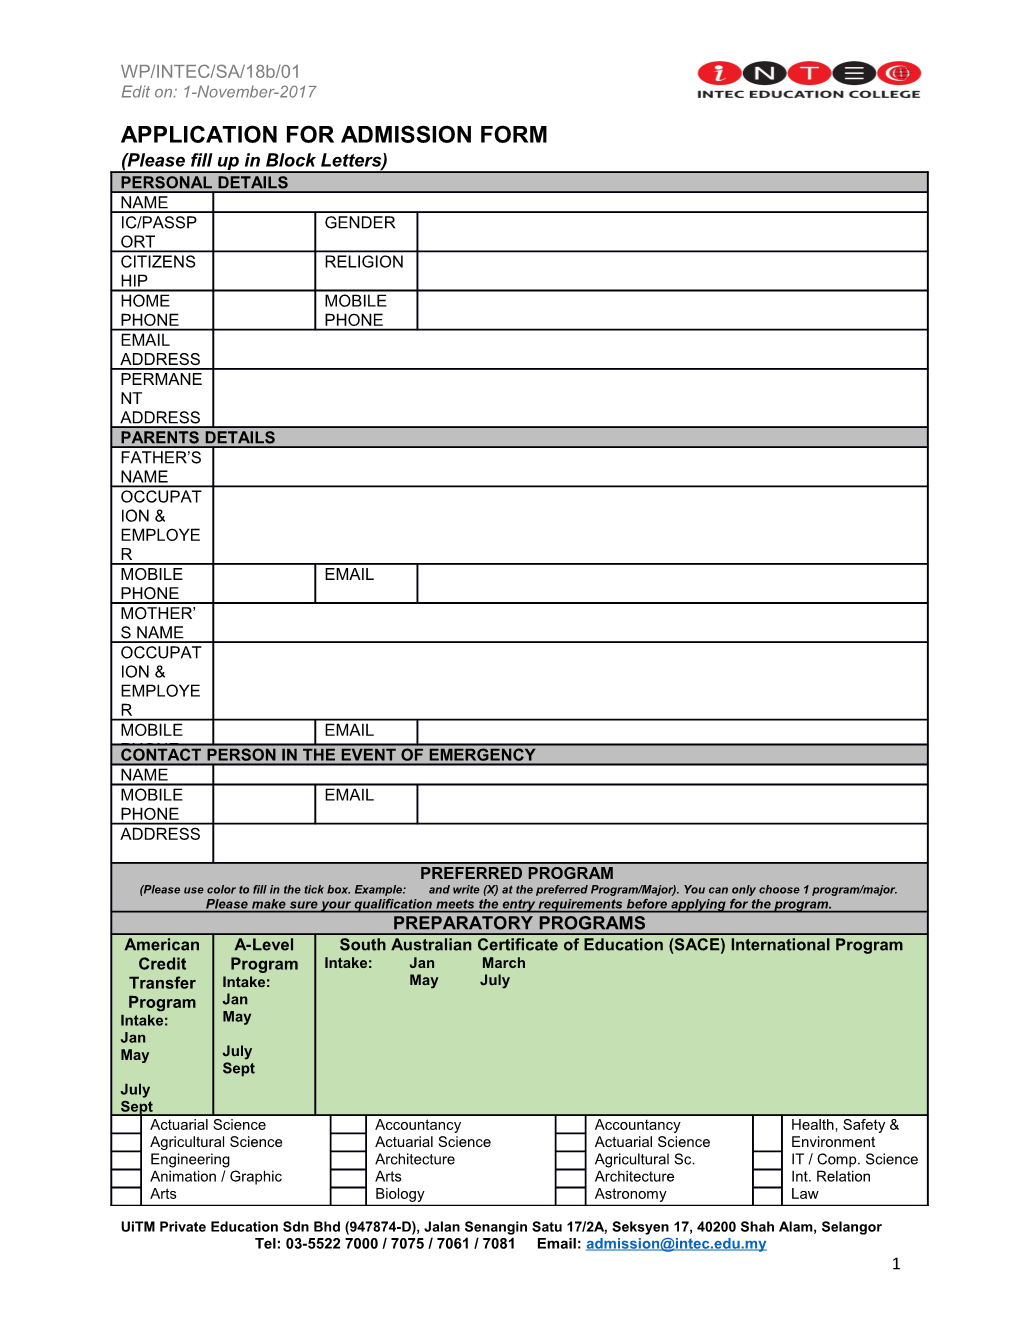 Application for Admission Form